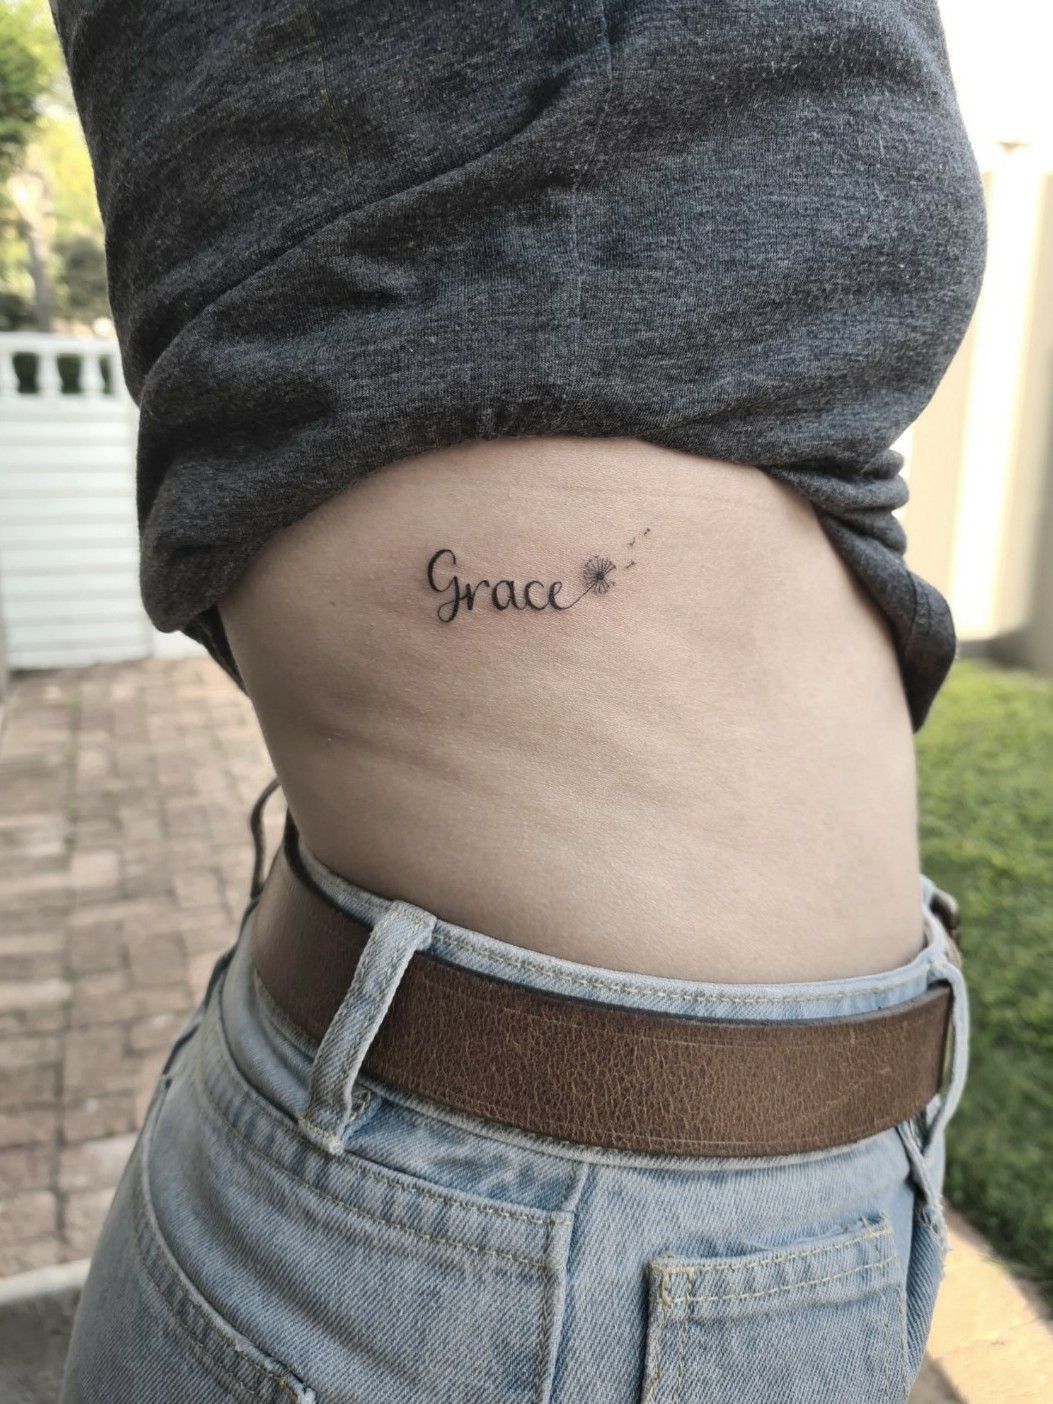 Saved by grace  Grace tattoos Tattoo quotes Tattoos